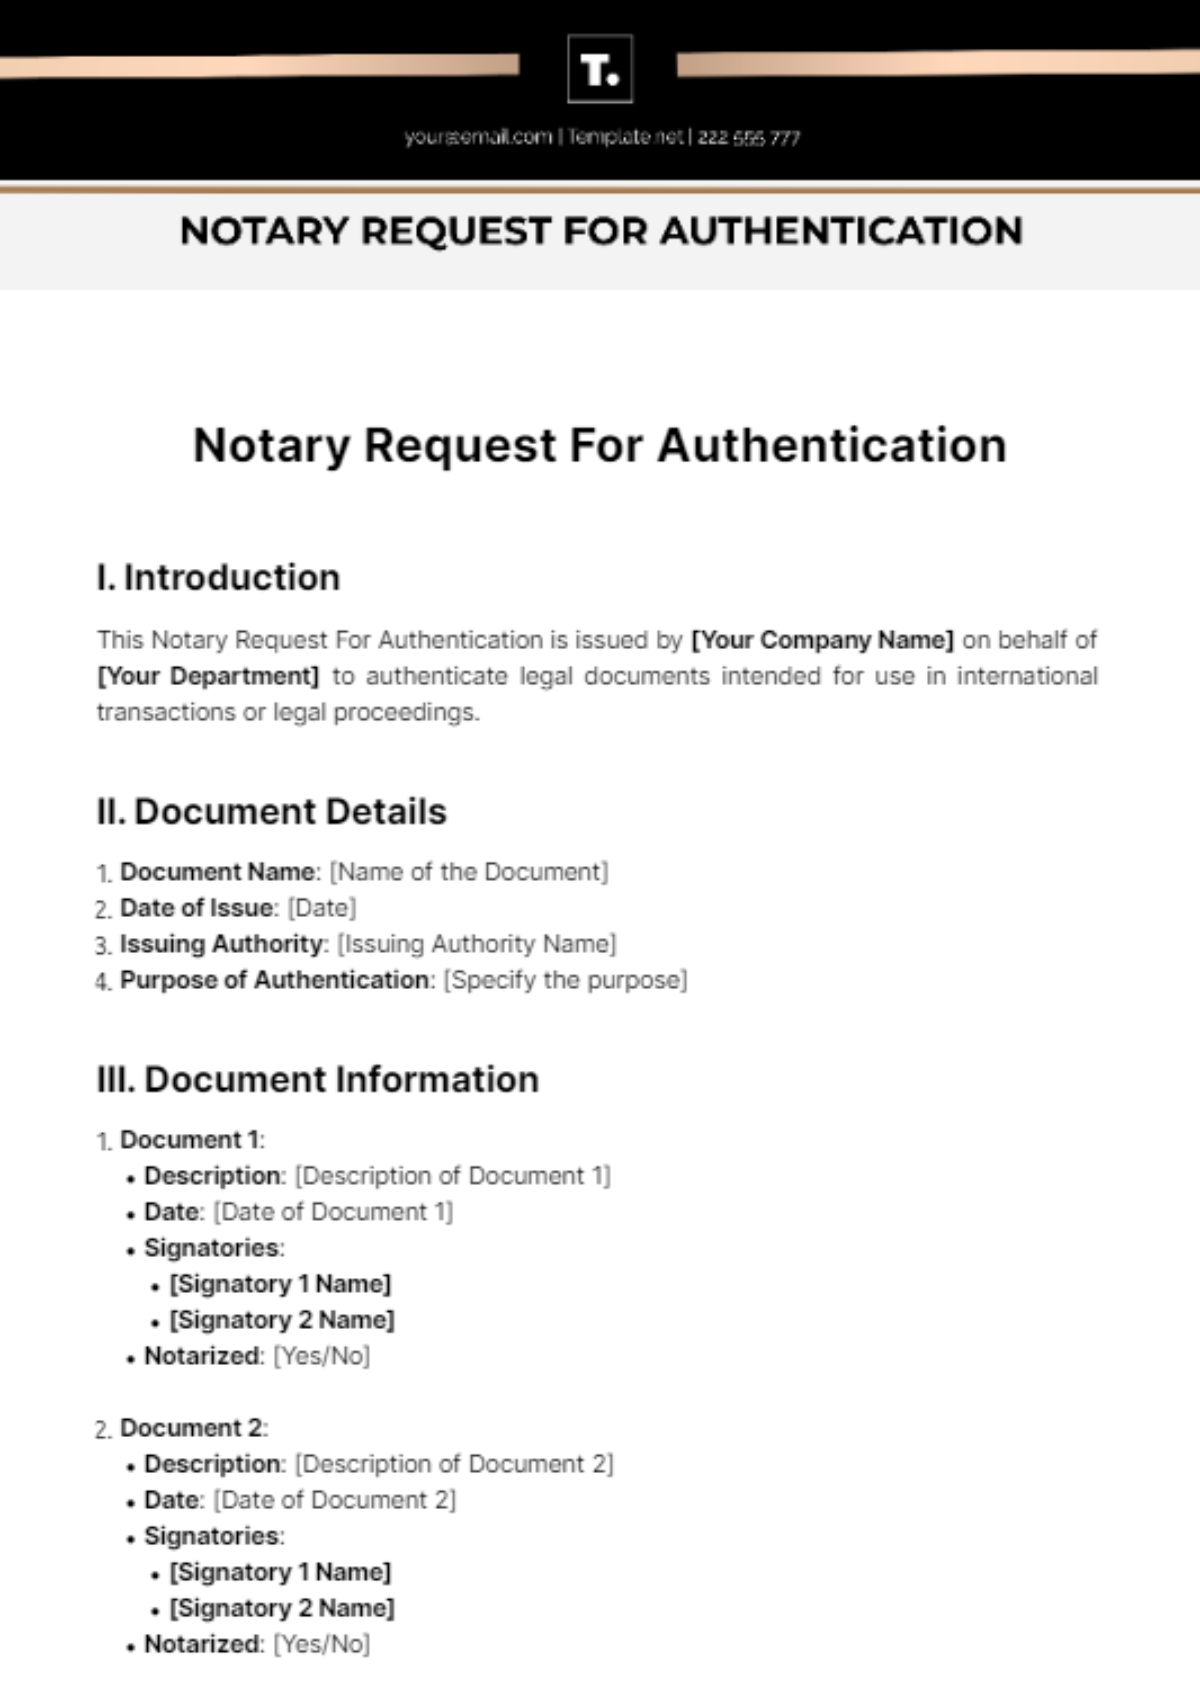 Notary Request For Authentication Template